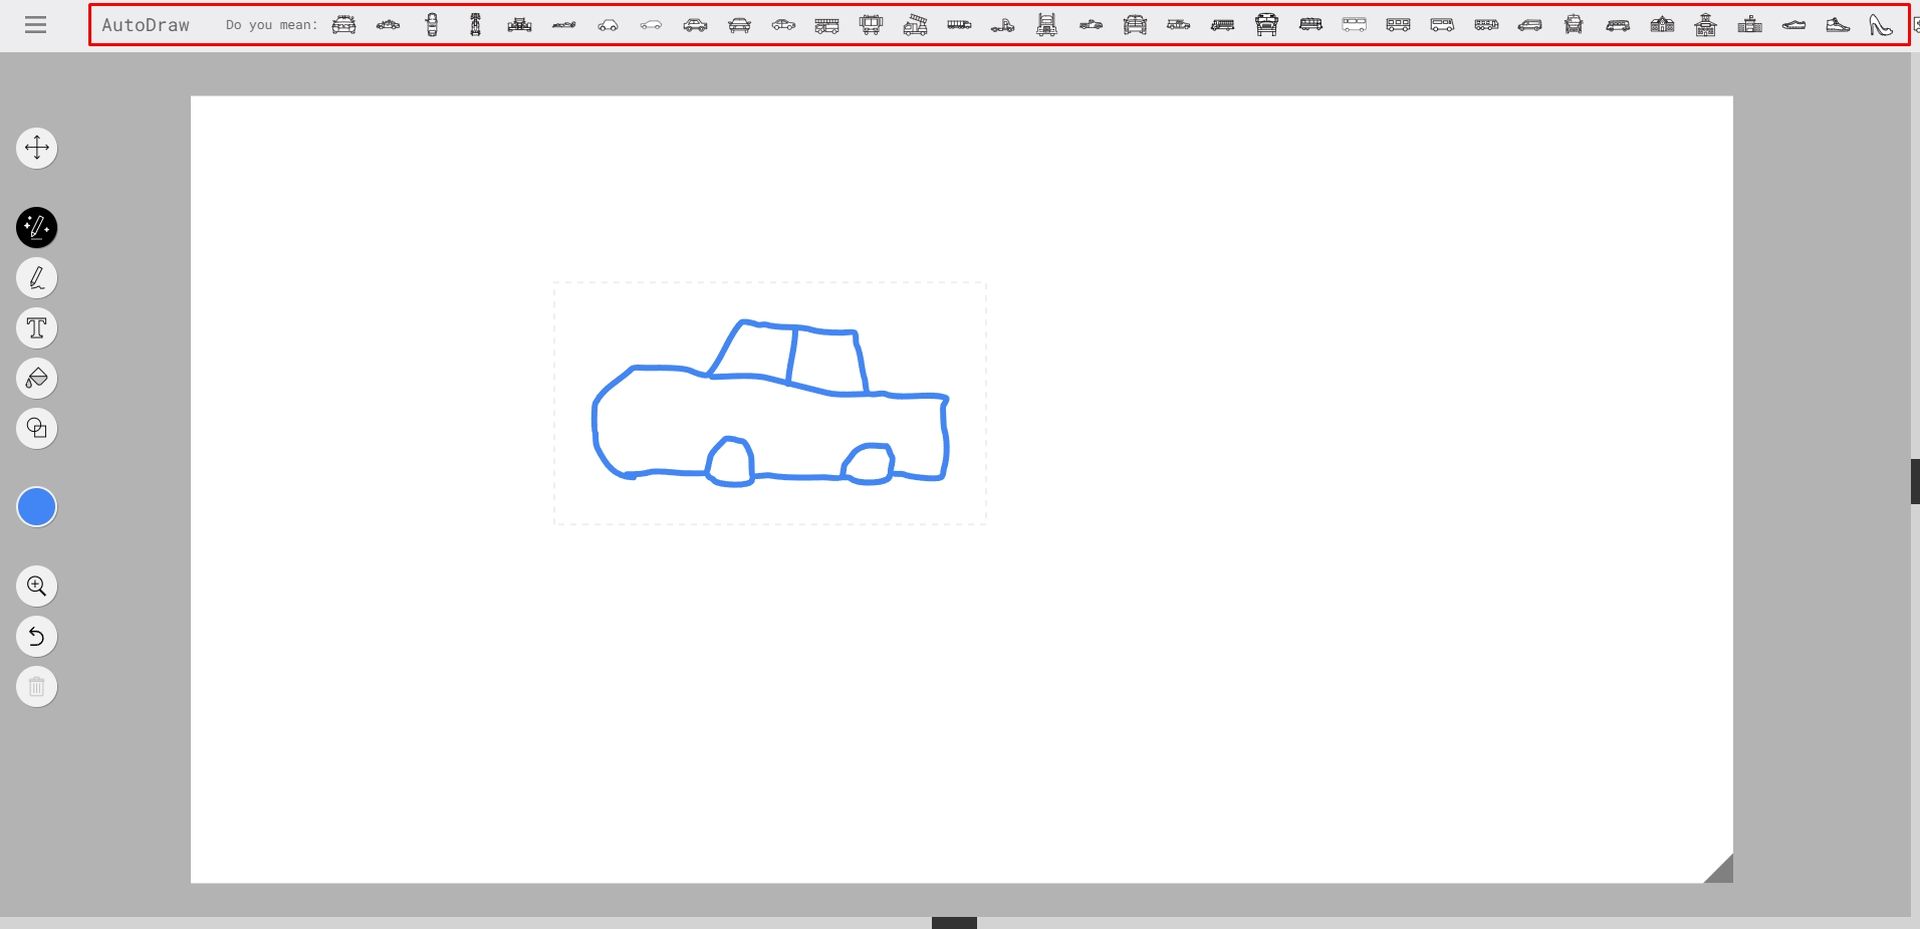 An Online Drawing Tool That Makes Everyone an Artist - AutoDraw